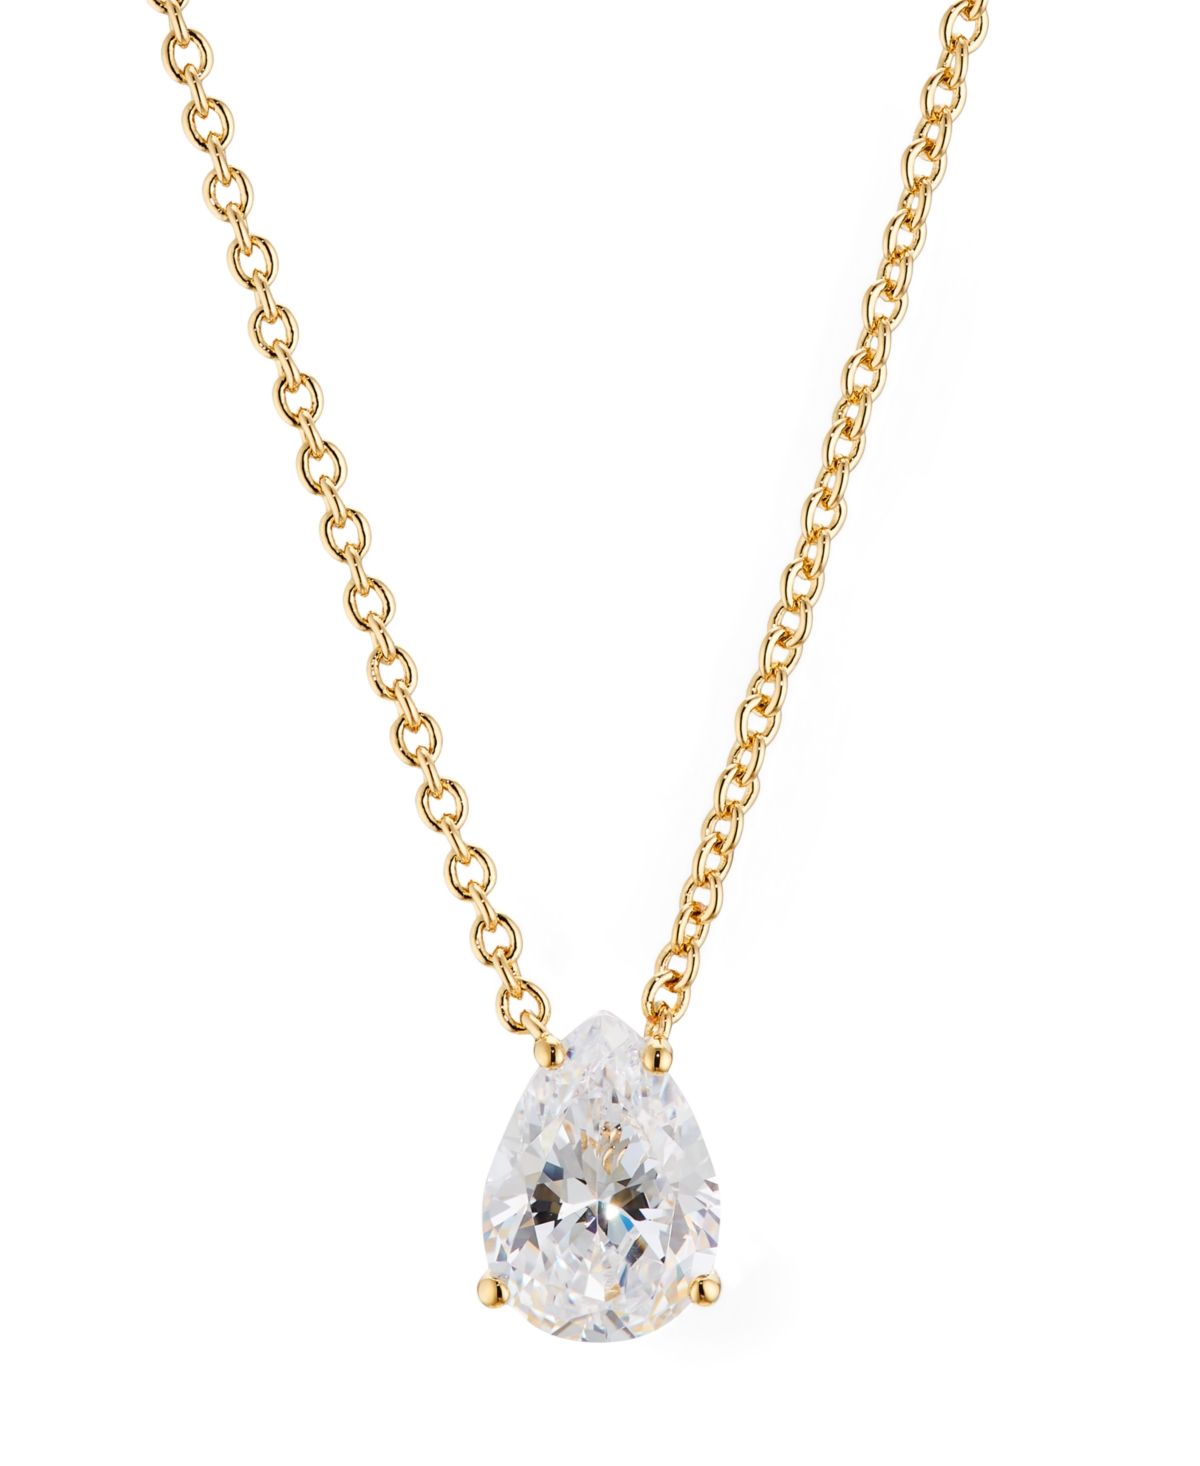 Pear Cubic Zirconia Necklace, 16" + 2" extender, Created for Macy's - Rhodium